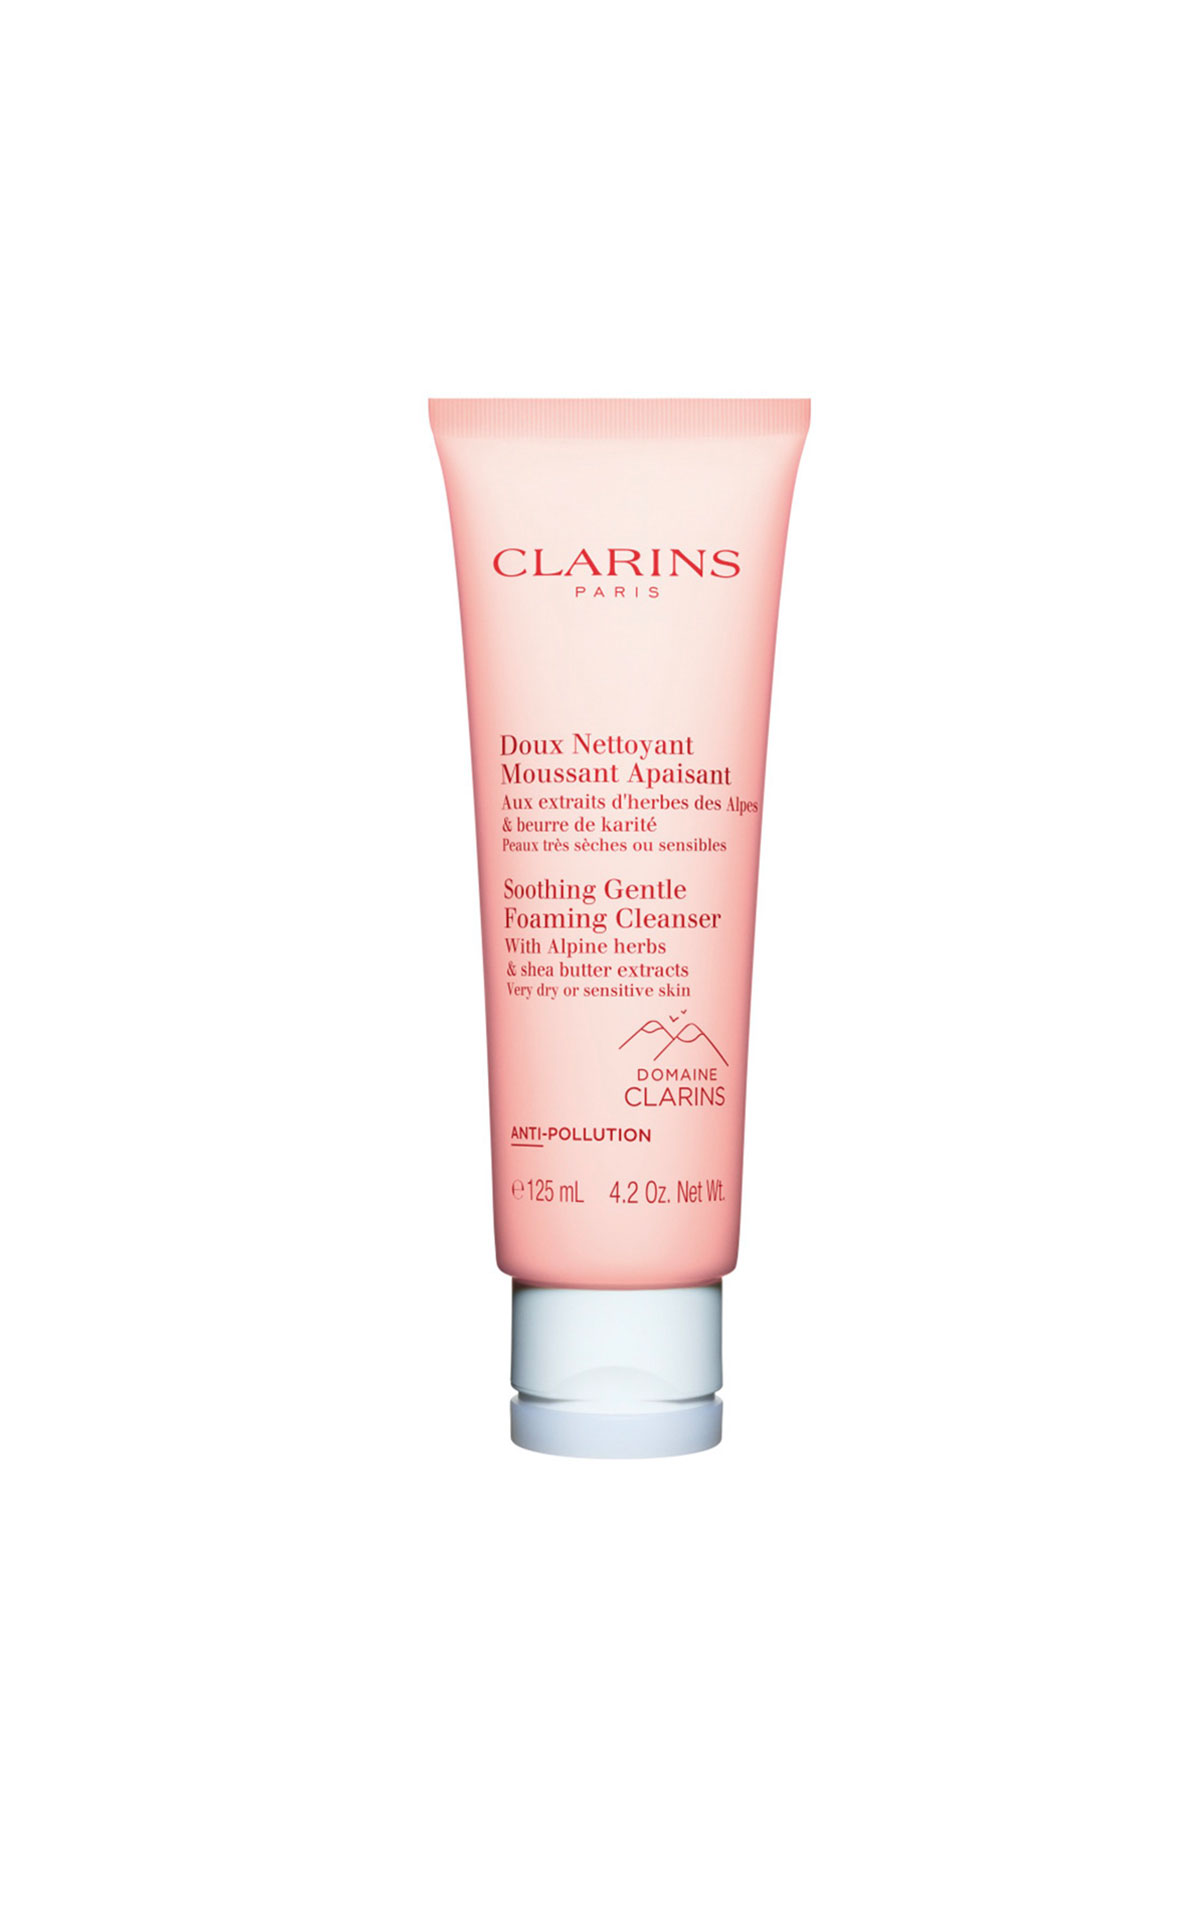 Clarins Soathing gentle foaming cleanser from Bicester Village